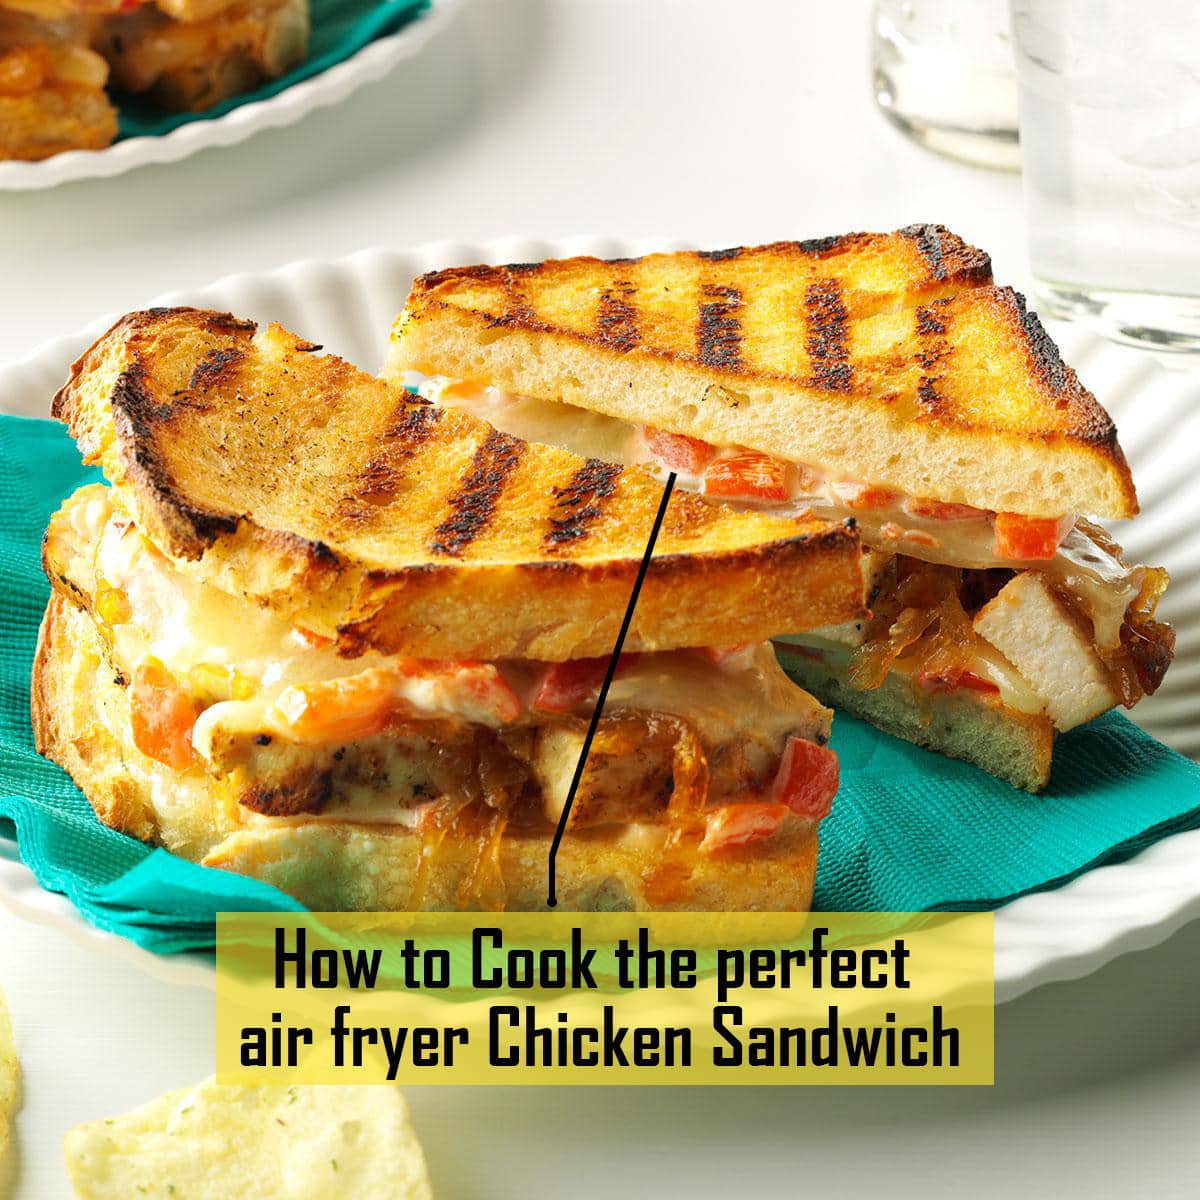 How to Cook the perfect air fryer Chicken Sandwich fryerly